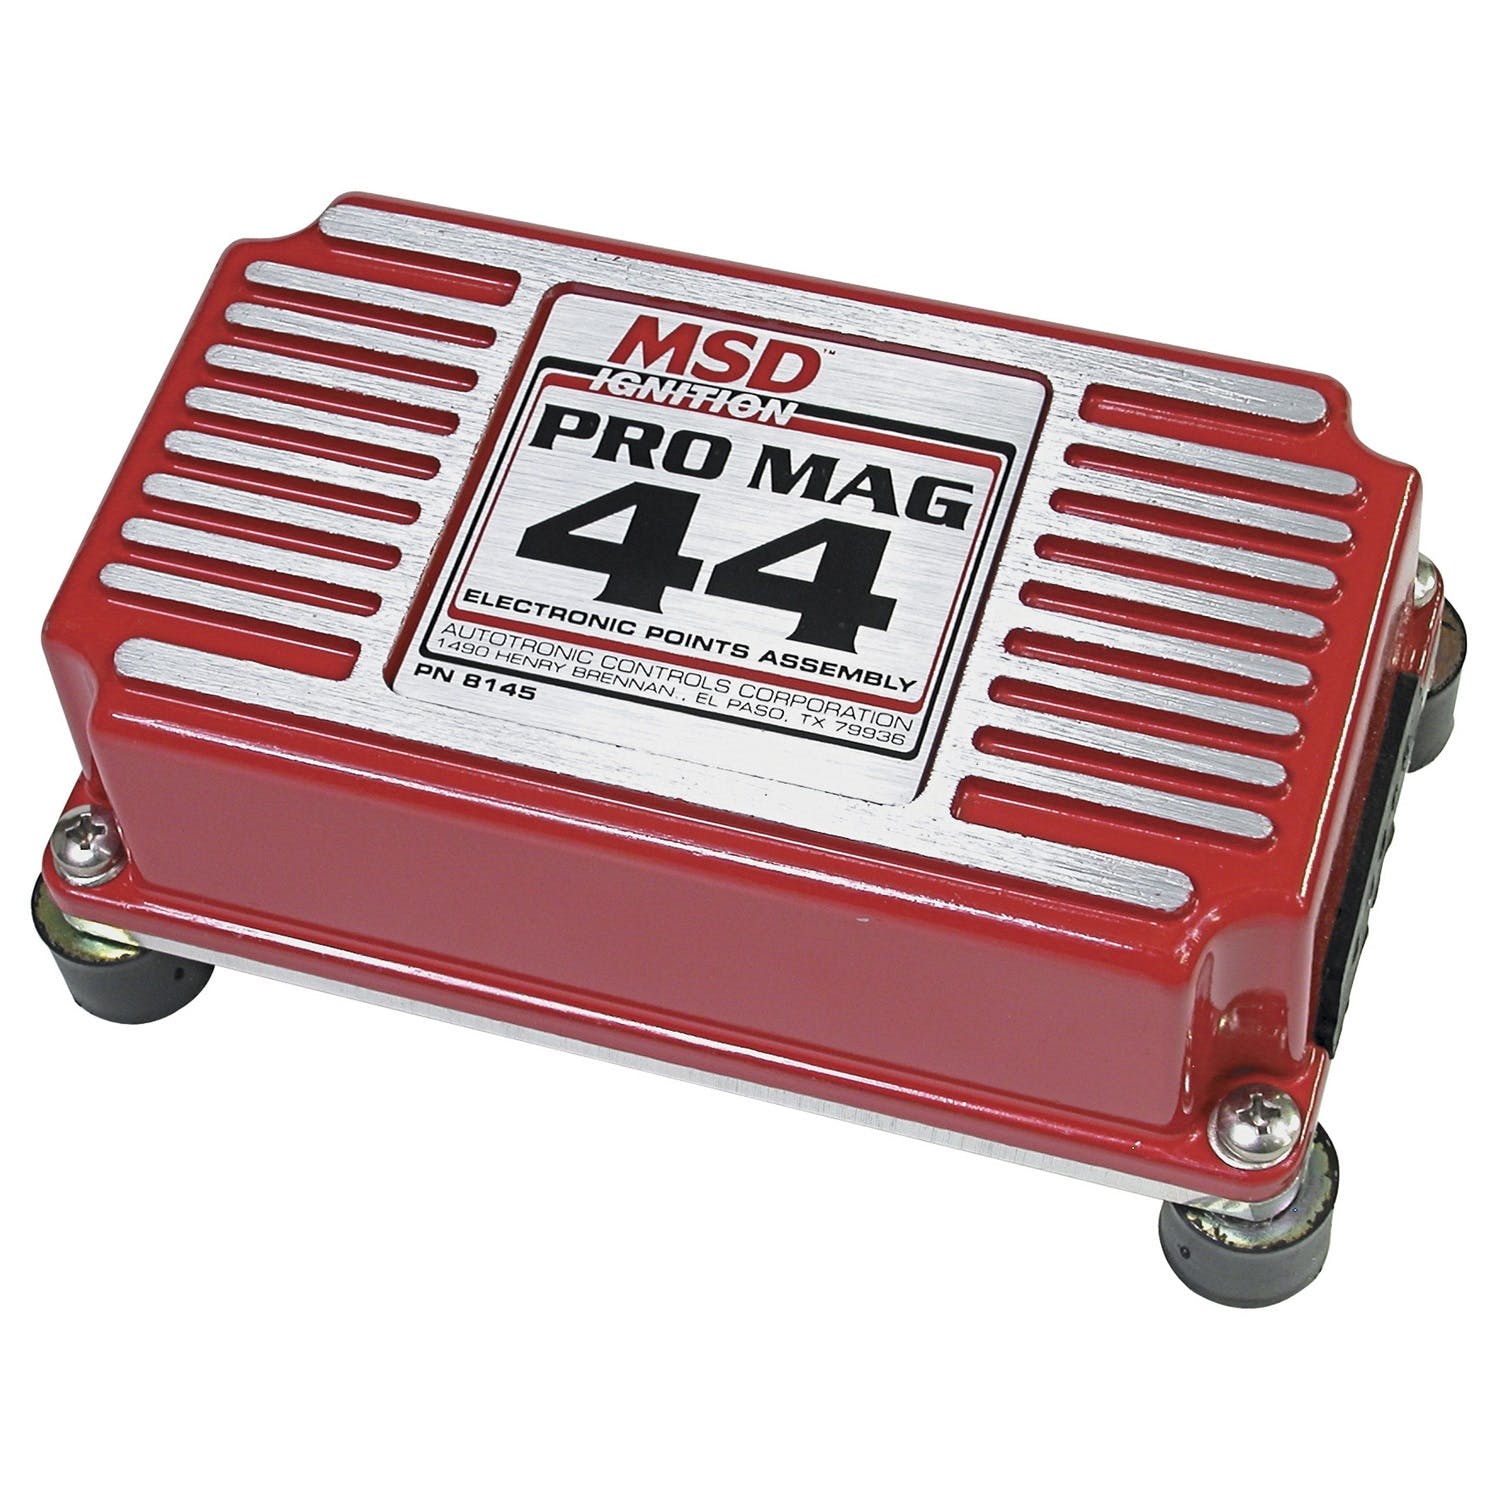 MSD Performance 8145MSD Electronic Points Box, Pro Mag 44 Amp